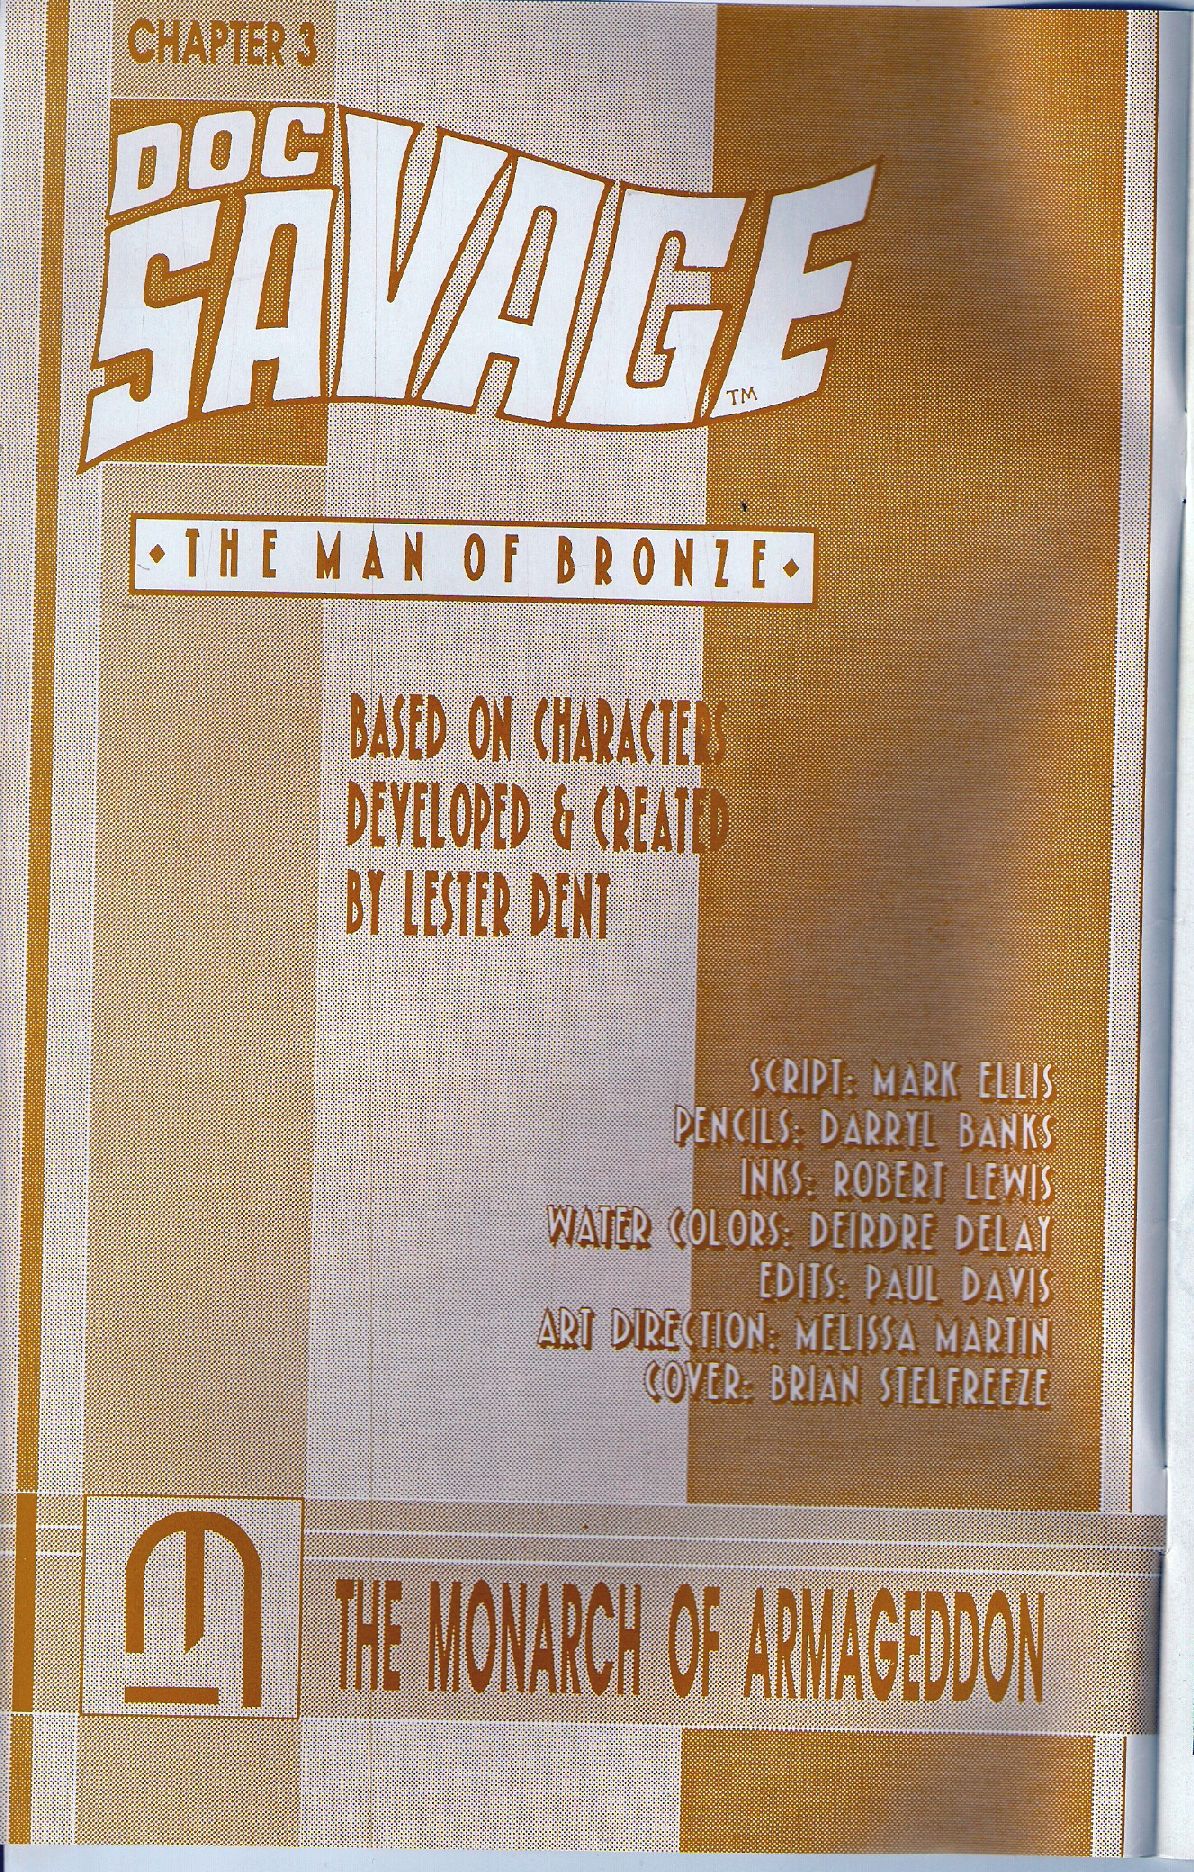 Read online Doc Savage: The Man of Bronze comic -  Issue #3 - 2